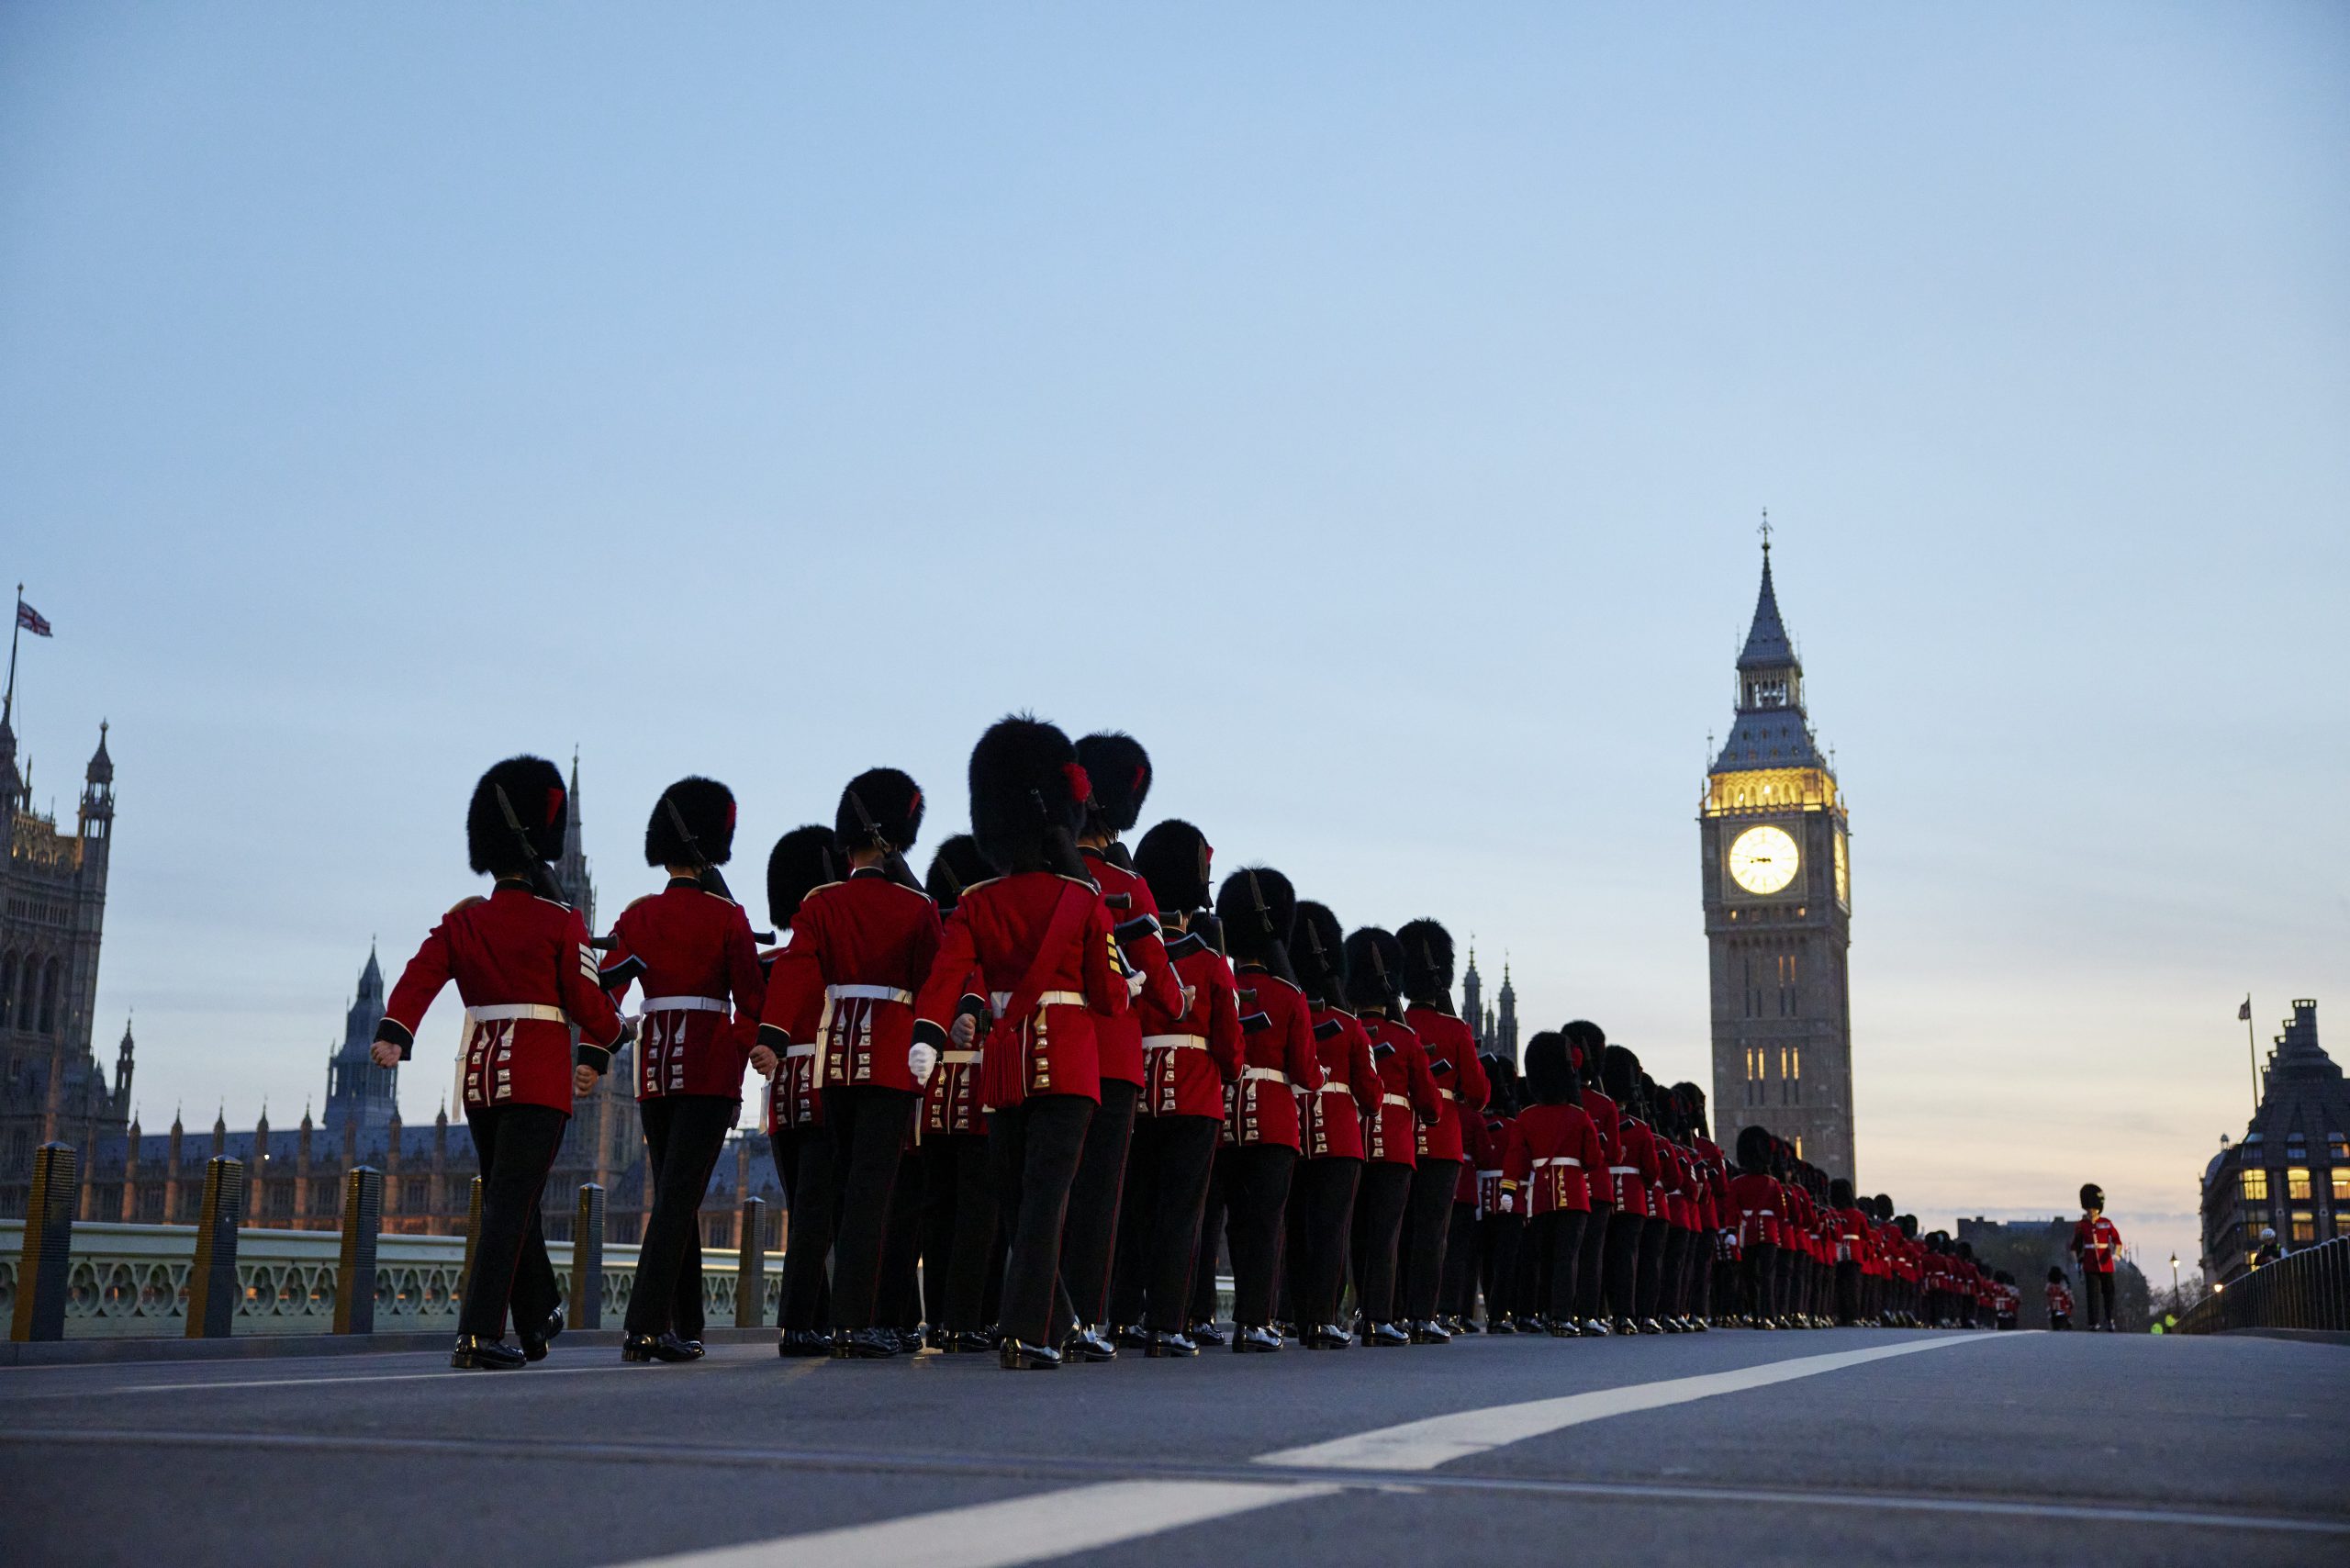 Royal guards march with Big Ben in the background